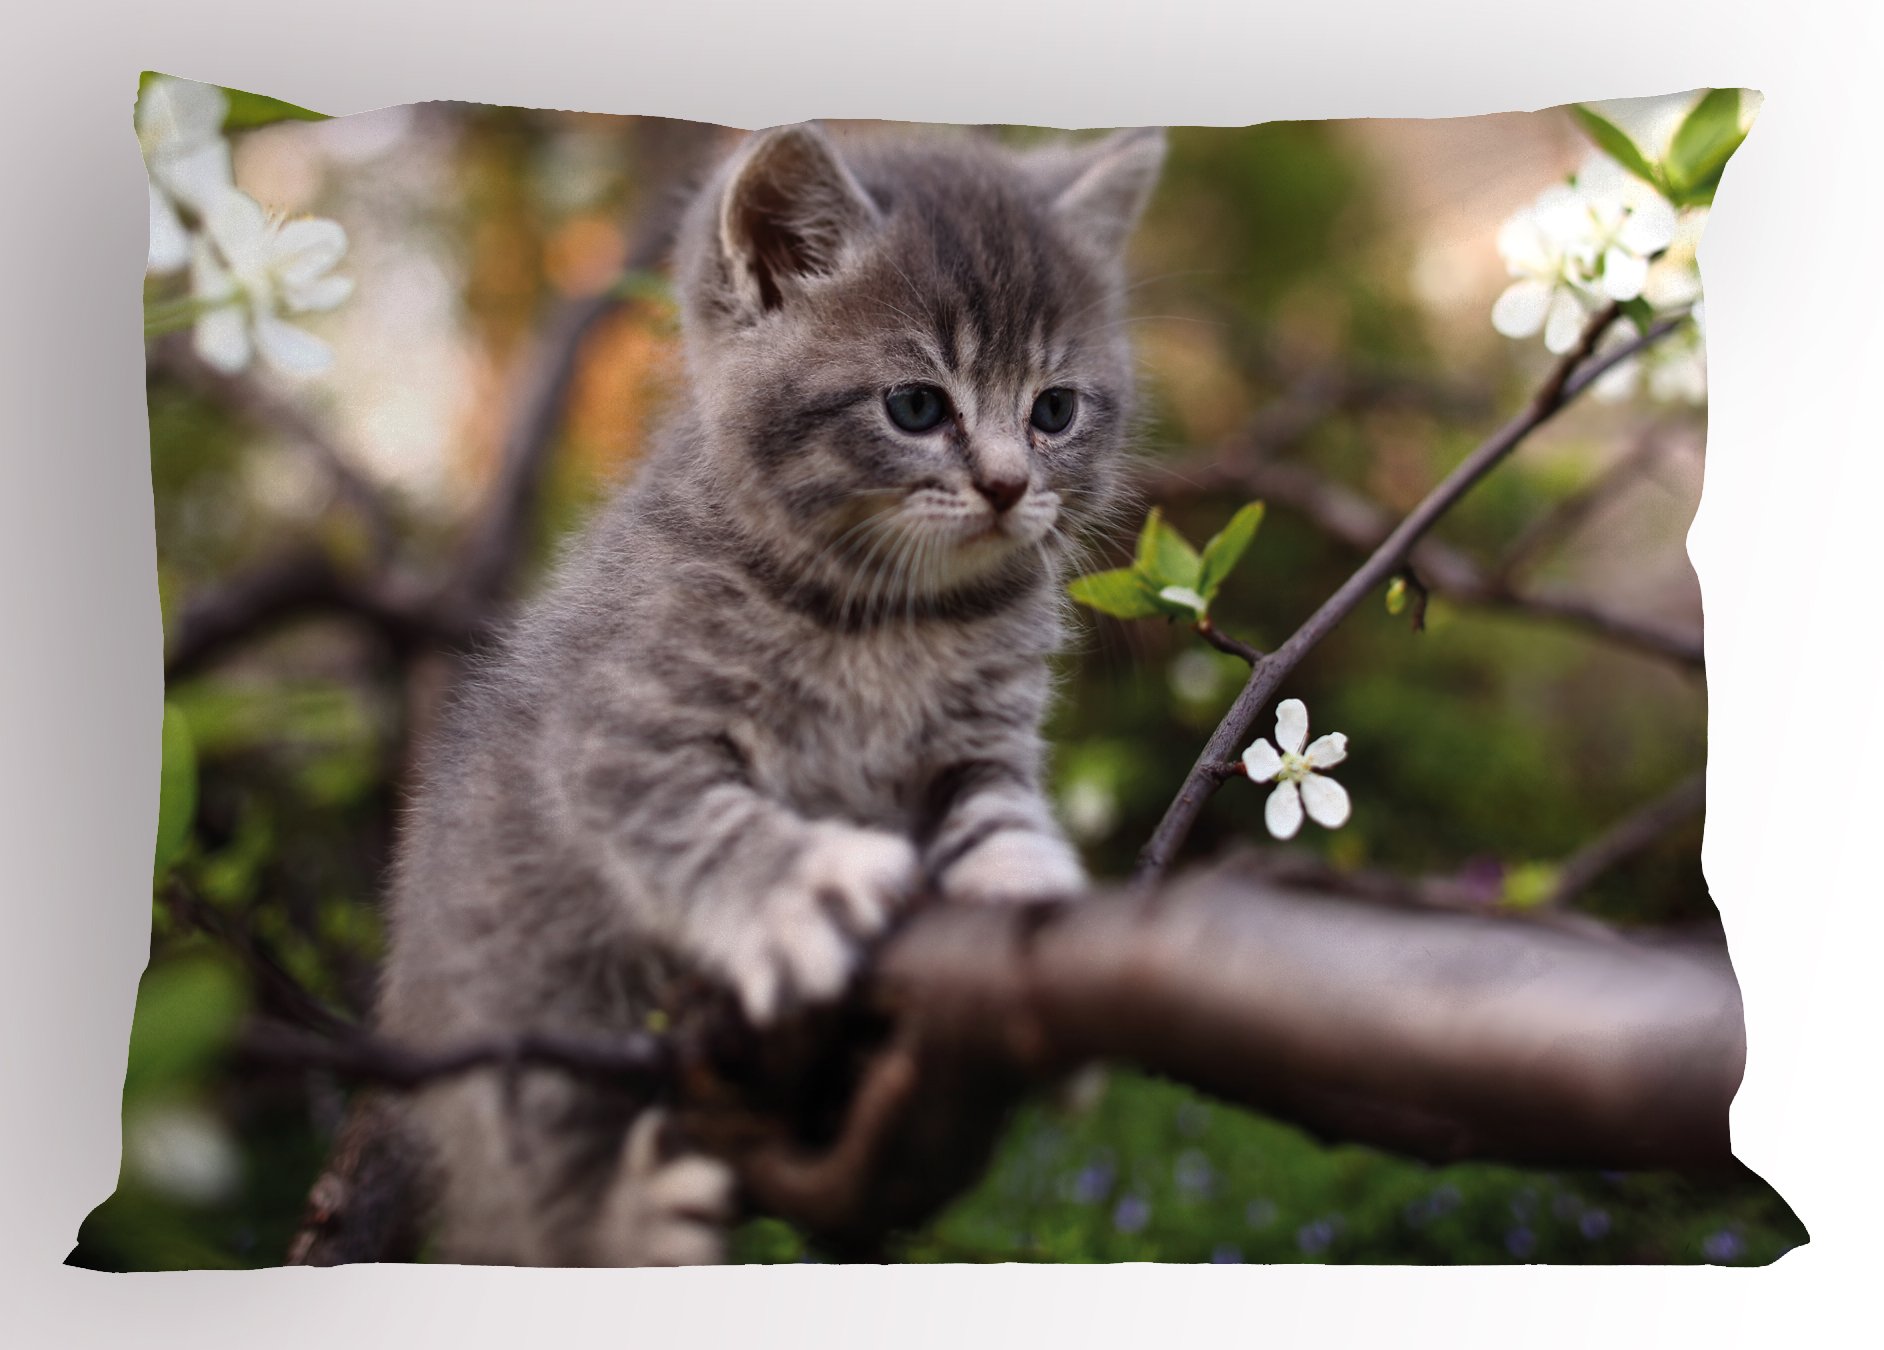 Lunarable cartoon Pillow Sham, Kitty on Blossoming Tree Branch Young Furry Feline cat Kitten, Decorative Standard Size Printed P